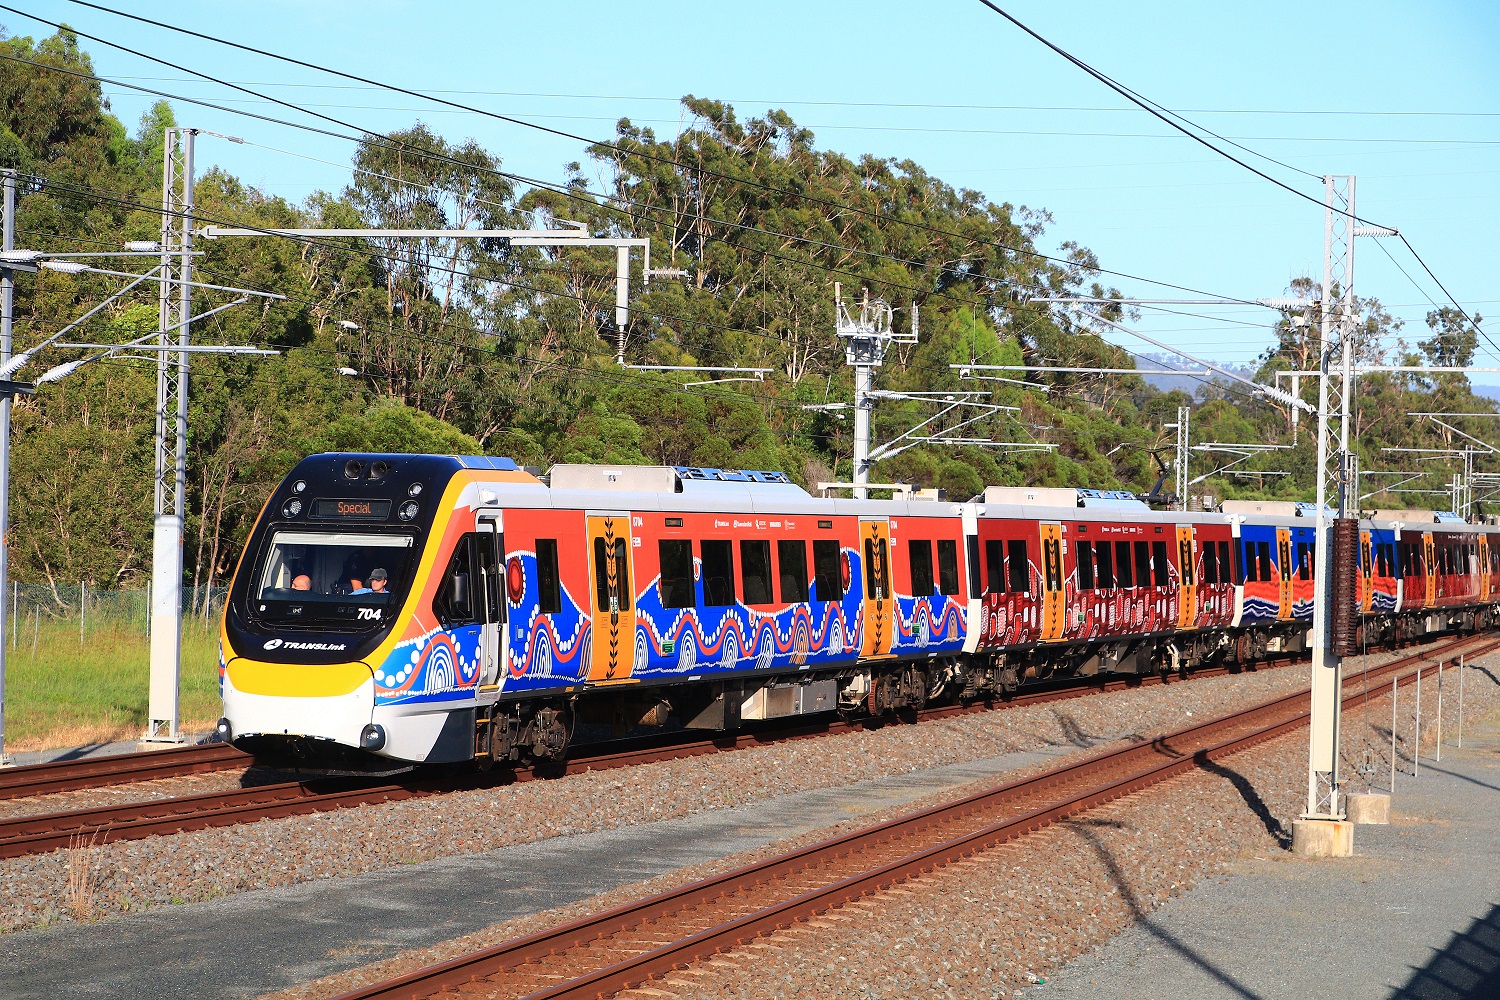 A New Generation Rollingstock train (with indigenous 'Travelling' artwork wrap) on the Gold Coast line.